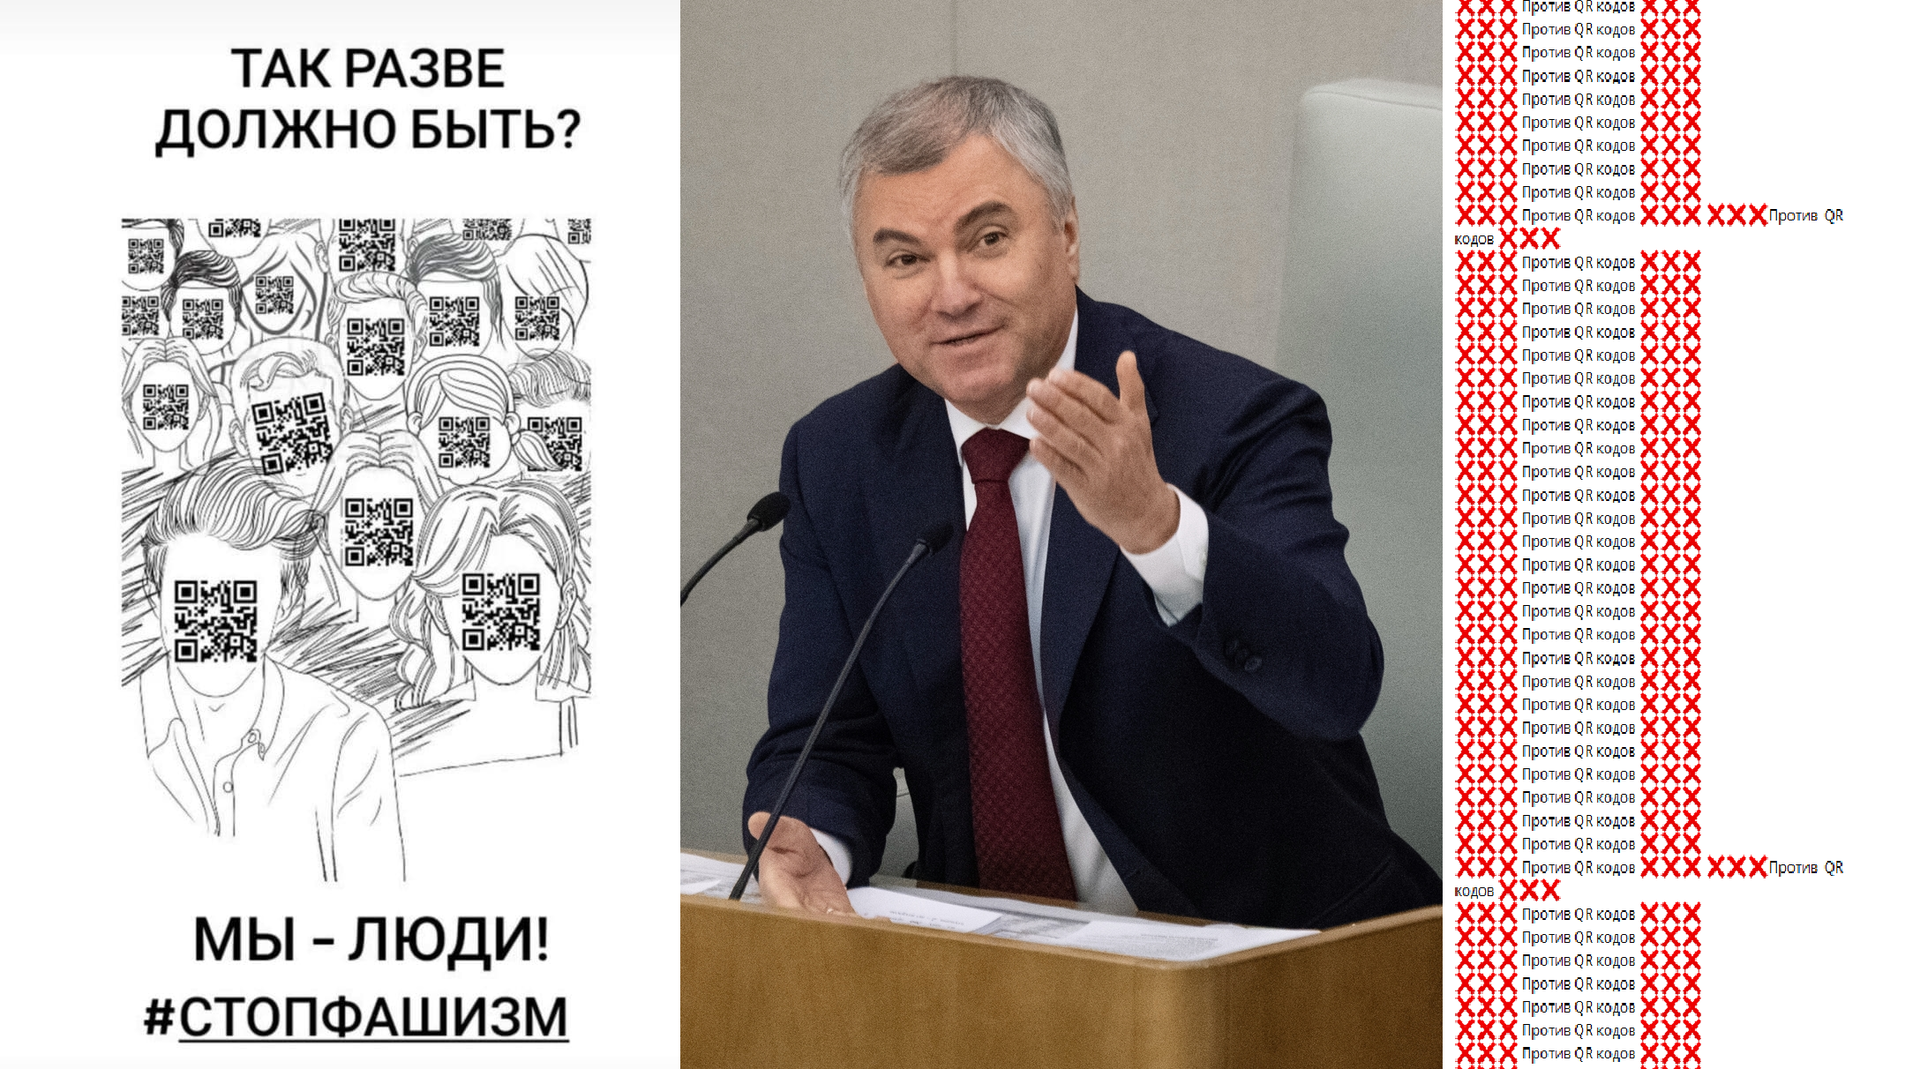 304 thousand NO: a tsunami of comments hit the Telegram channel of the State Duma speaker Volodin